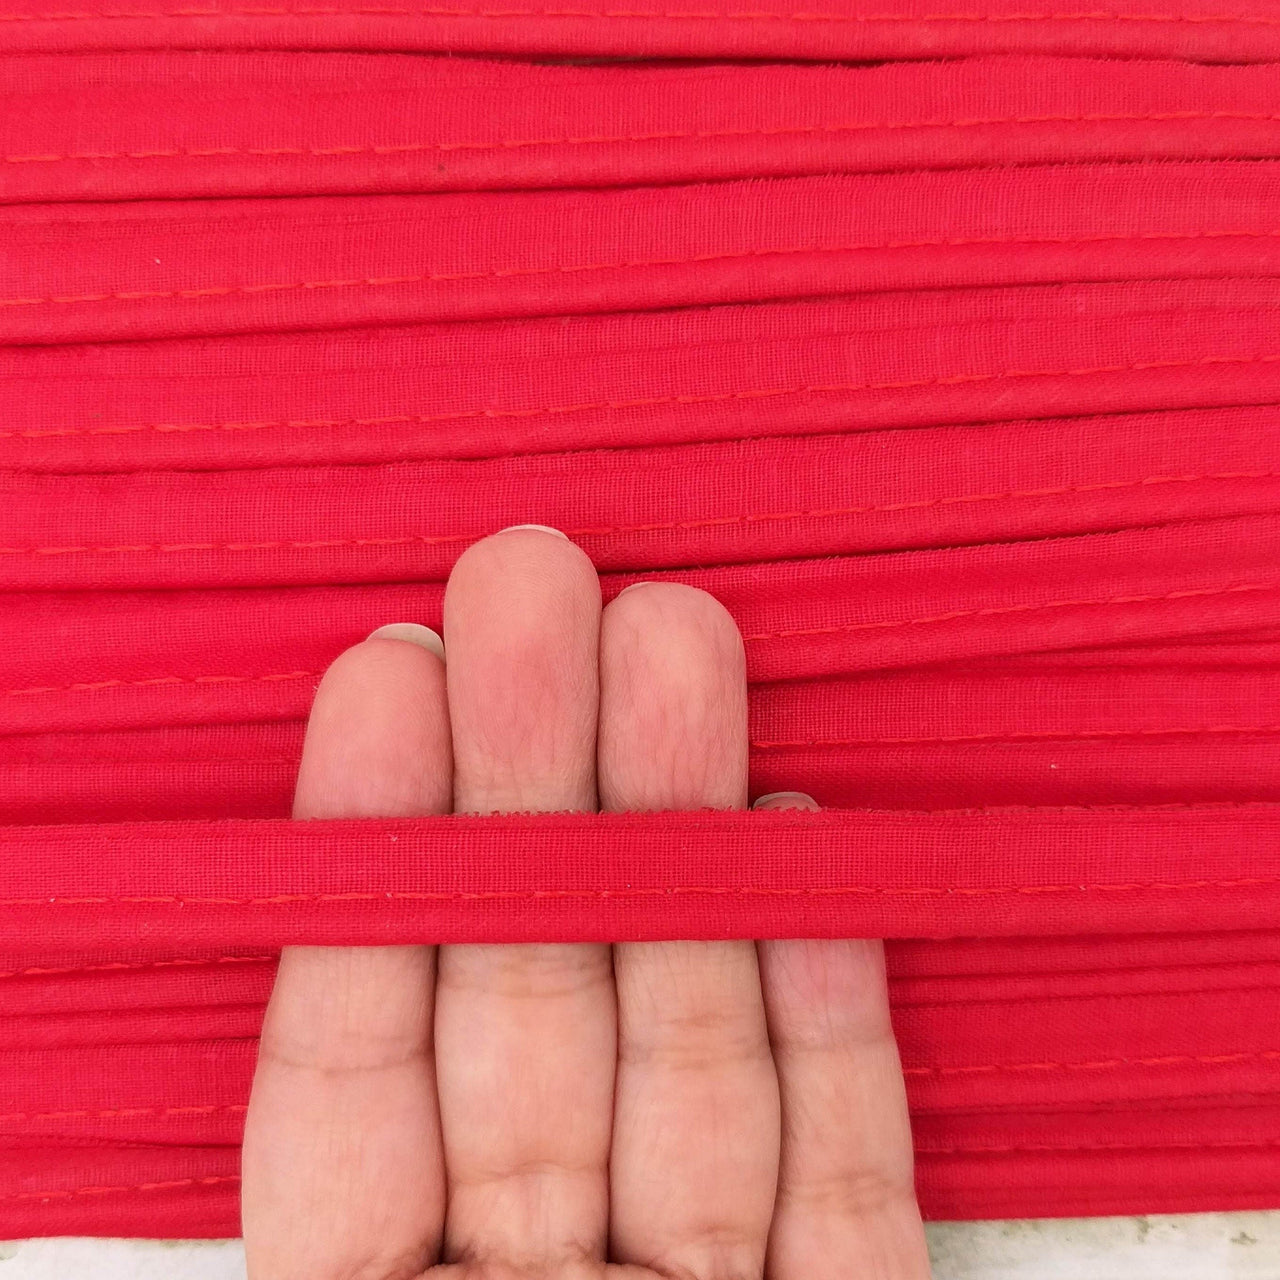 3 Yards, 5mm Flanged Insertion Piping on 10mm Band, Red Fabric Trim